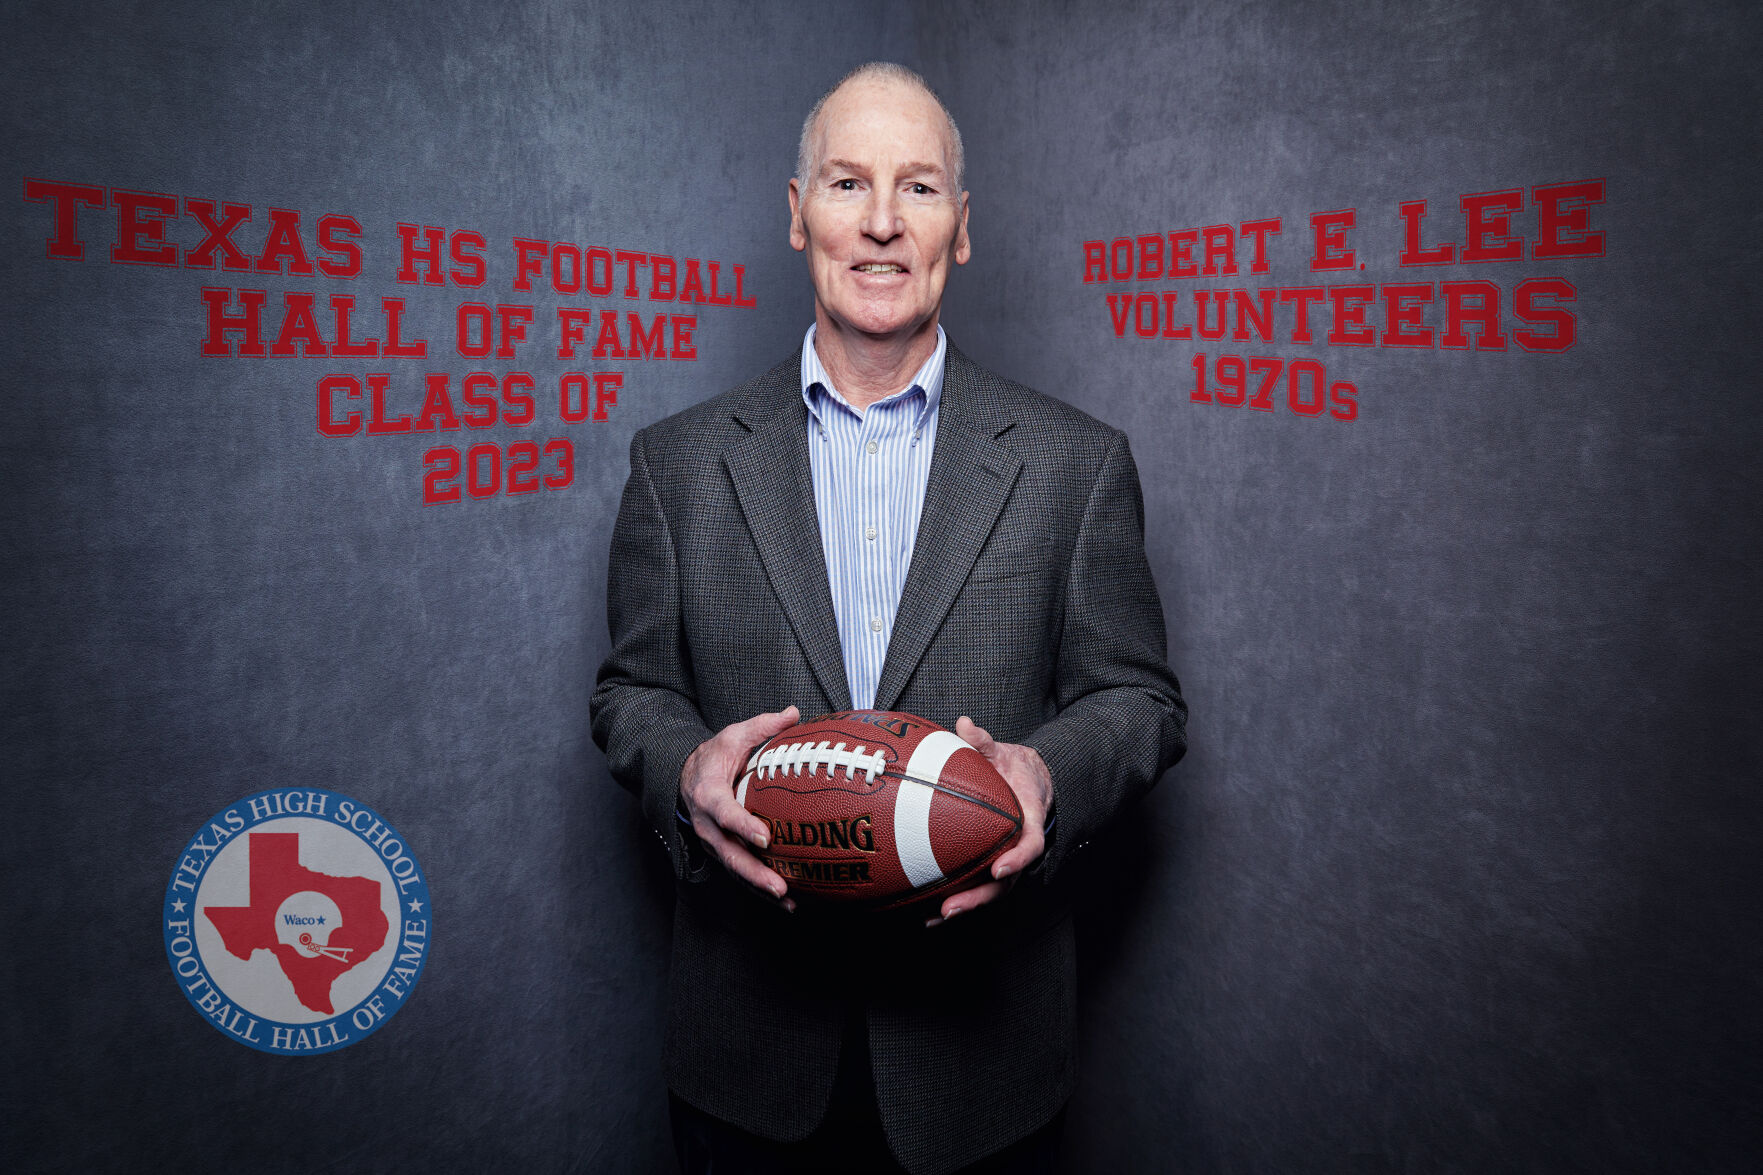 Texas High School Football Hall of Fame Rockett recalls living a dream with Lee football pic